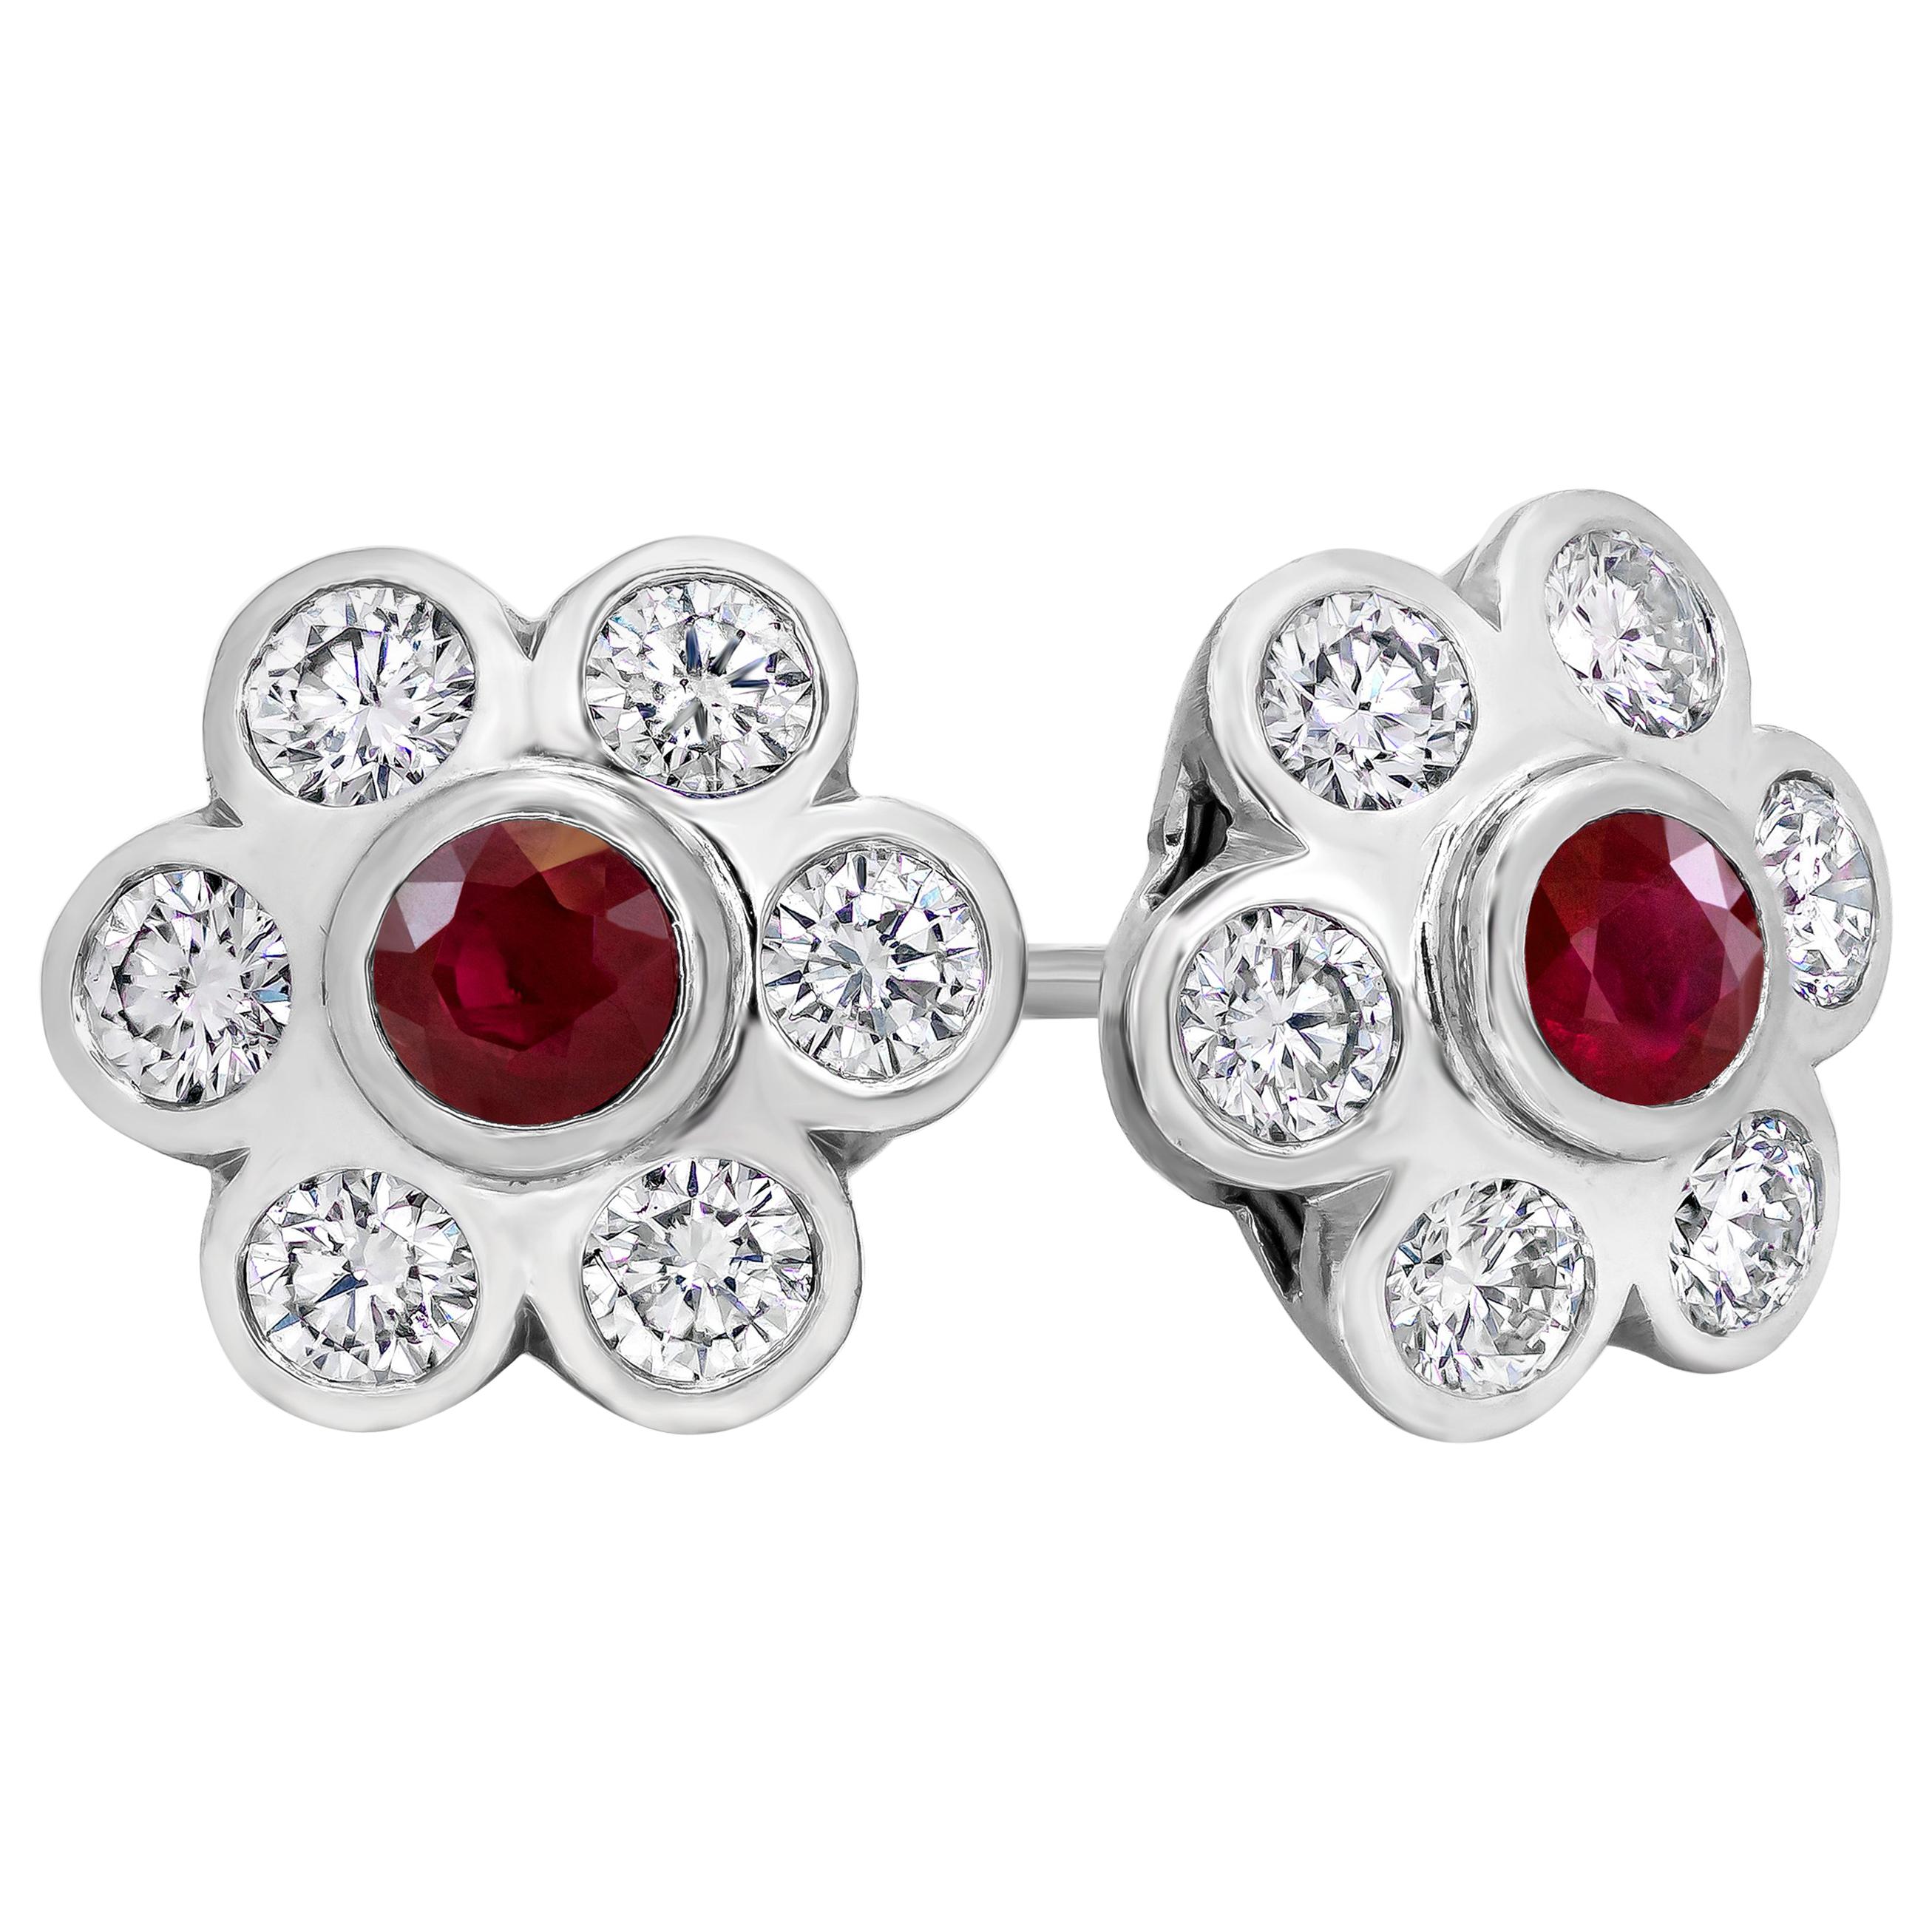 Roman Malakov 2.07 Carats Total Ruby and Diamond Flower Earrings in White Gold For Sale